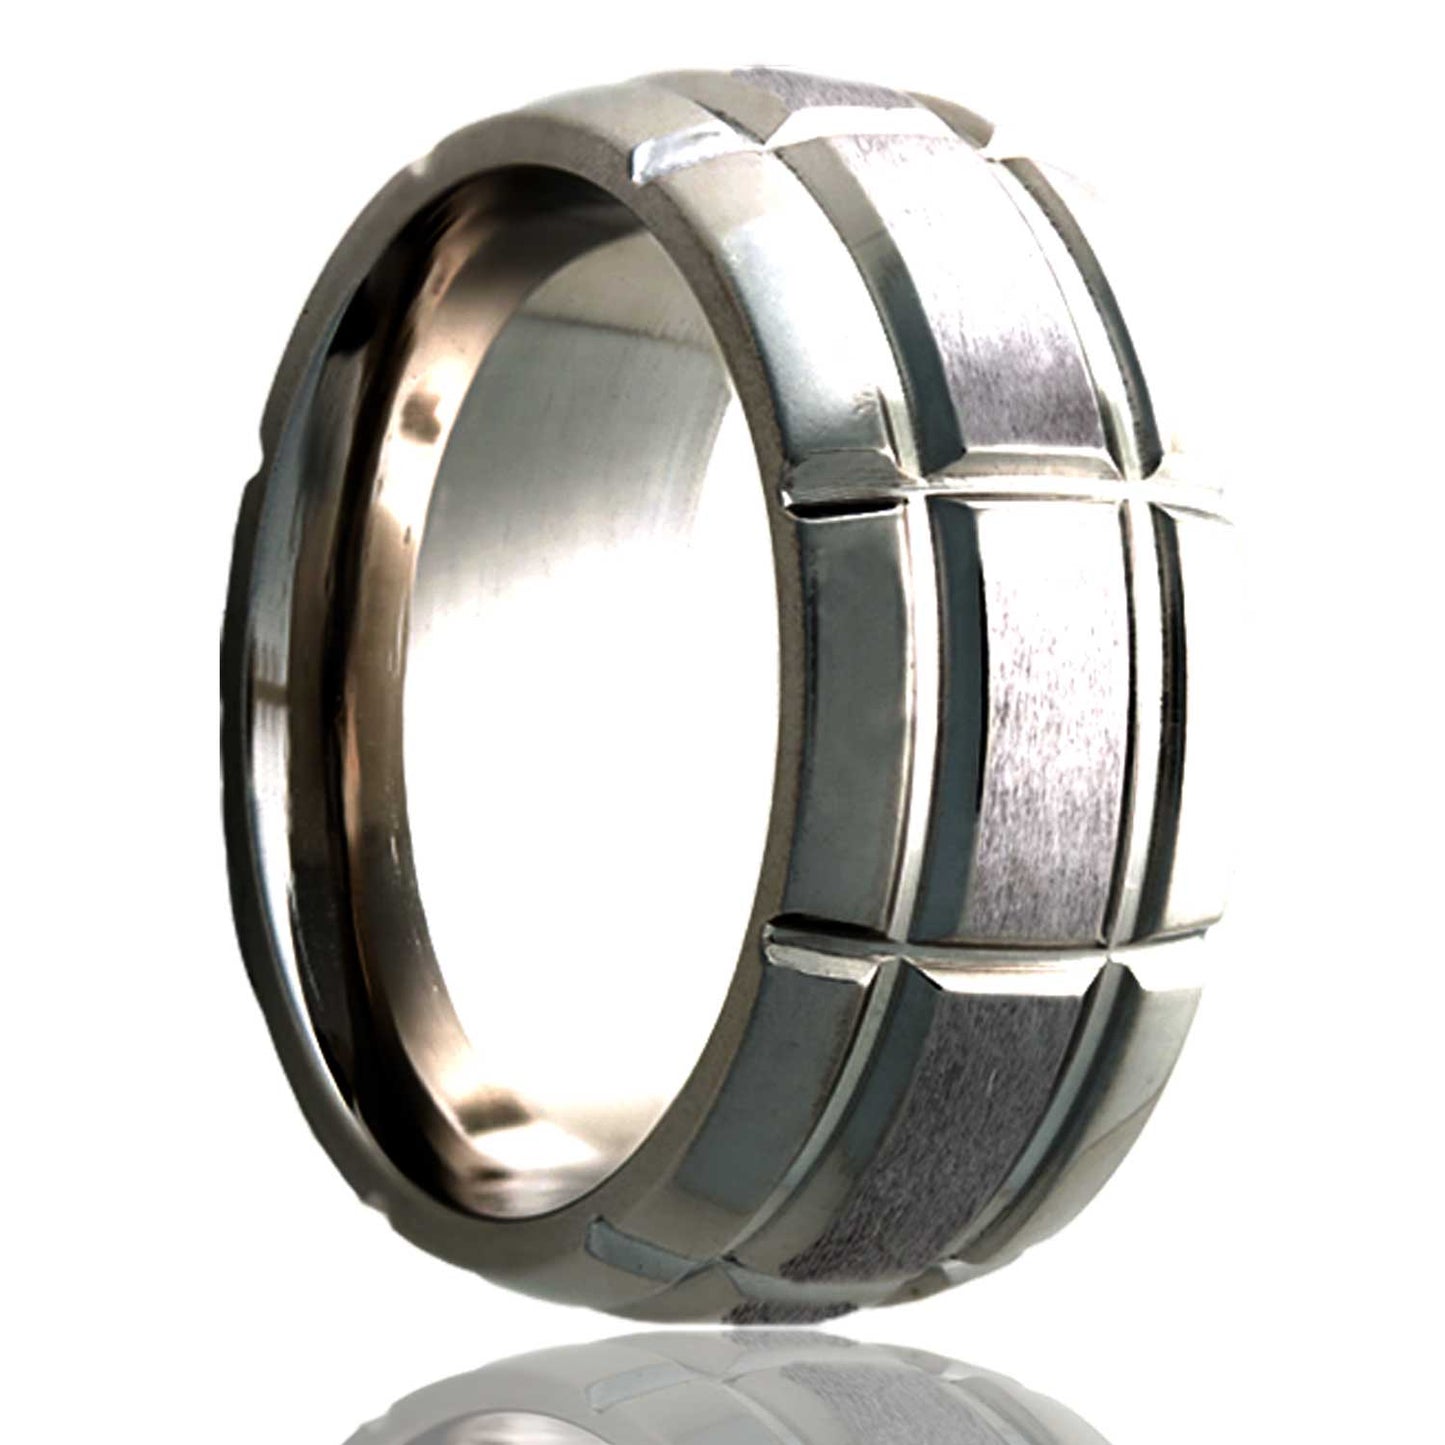 A intersecting groove pattern domed satin finish cobalt wedding band displayed on a neutral white background.